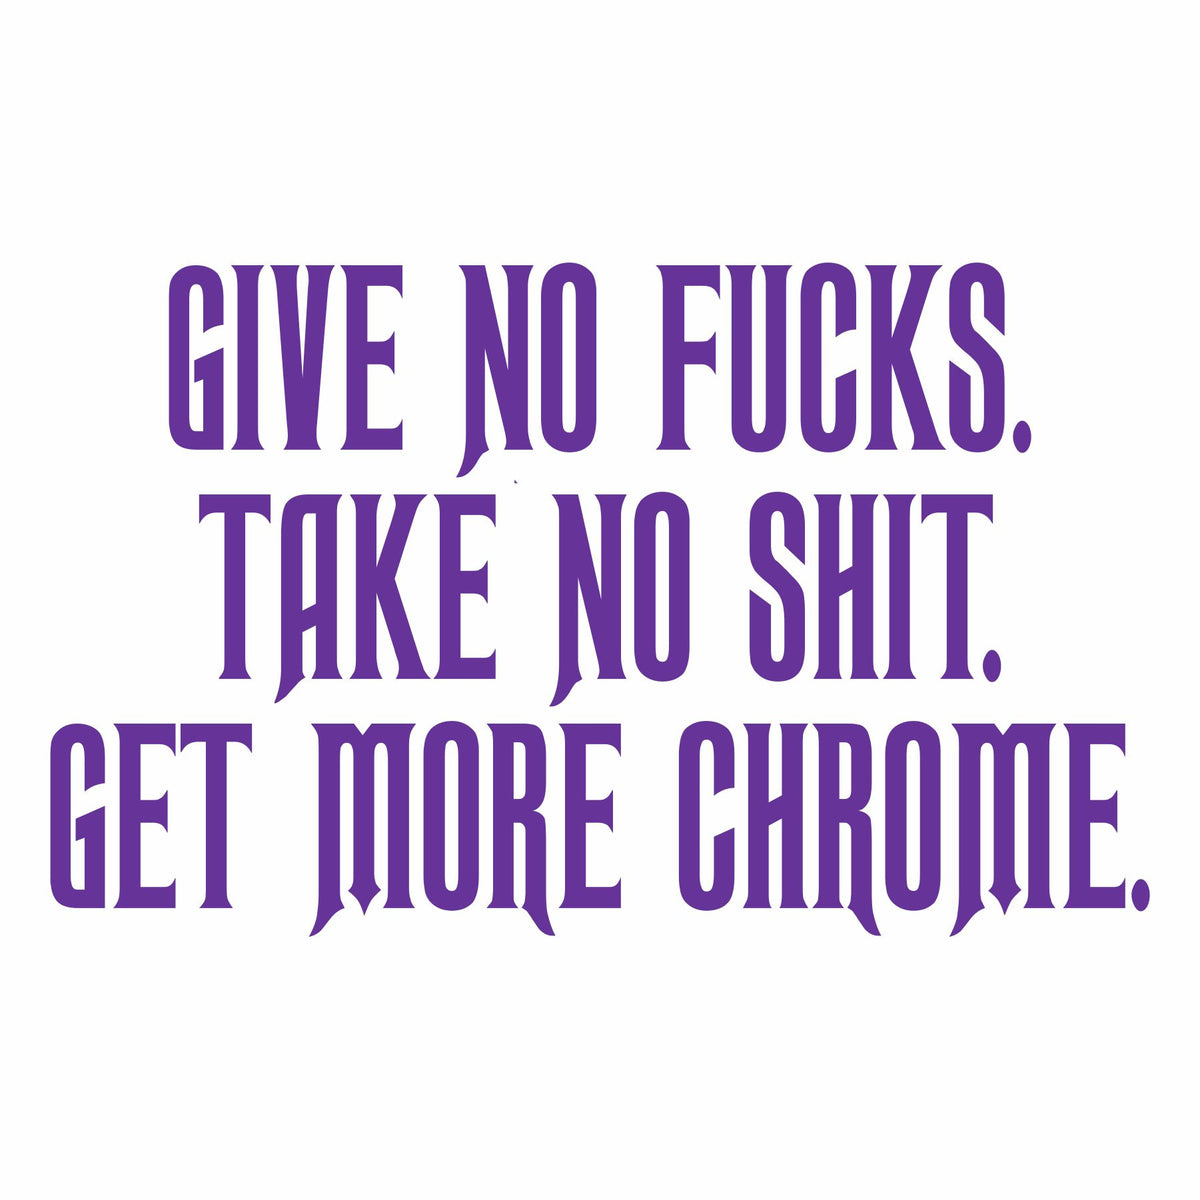 Give No Fucks - Get More Chrome - Vinyl Decal - Free Shipping